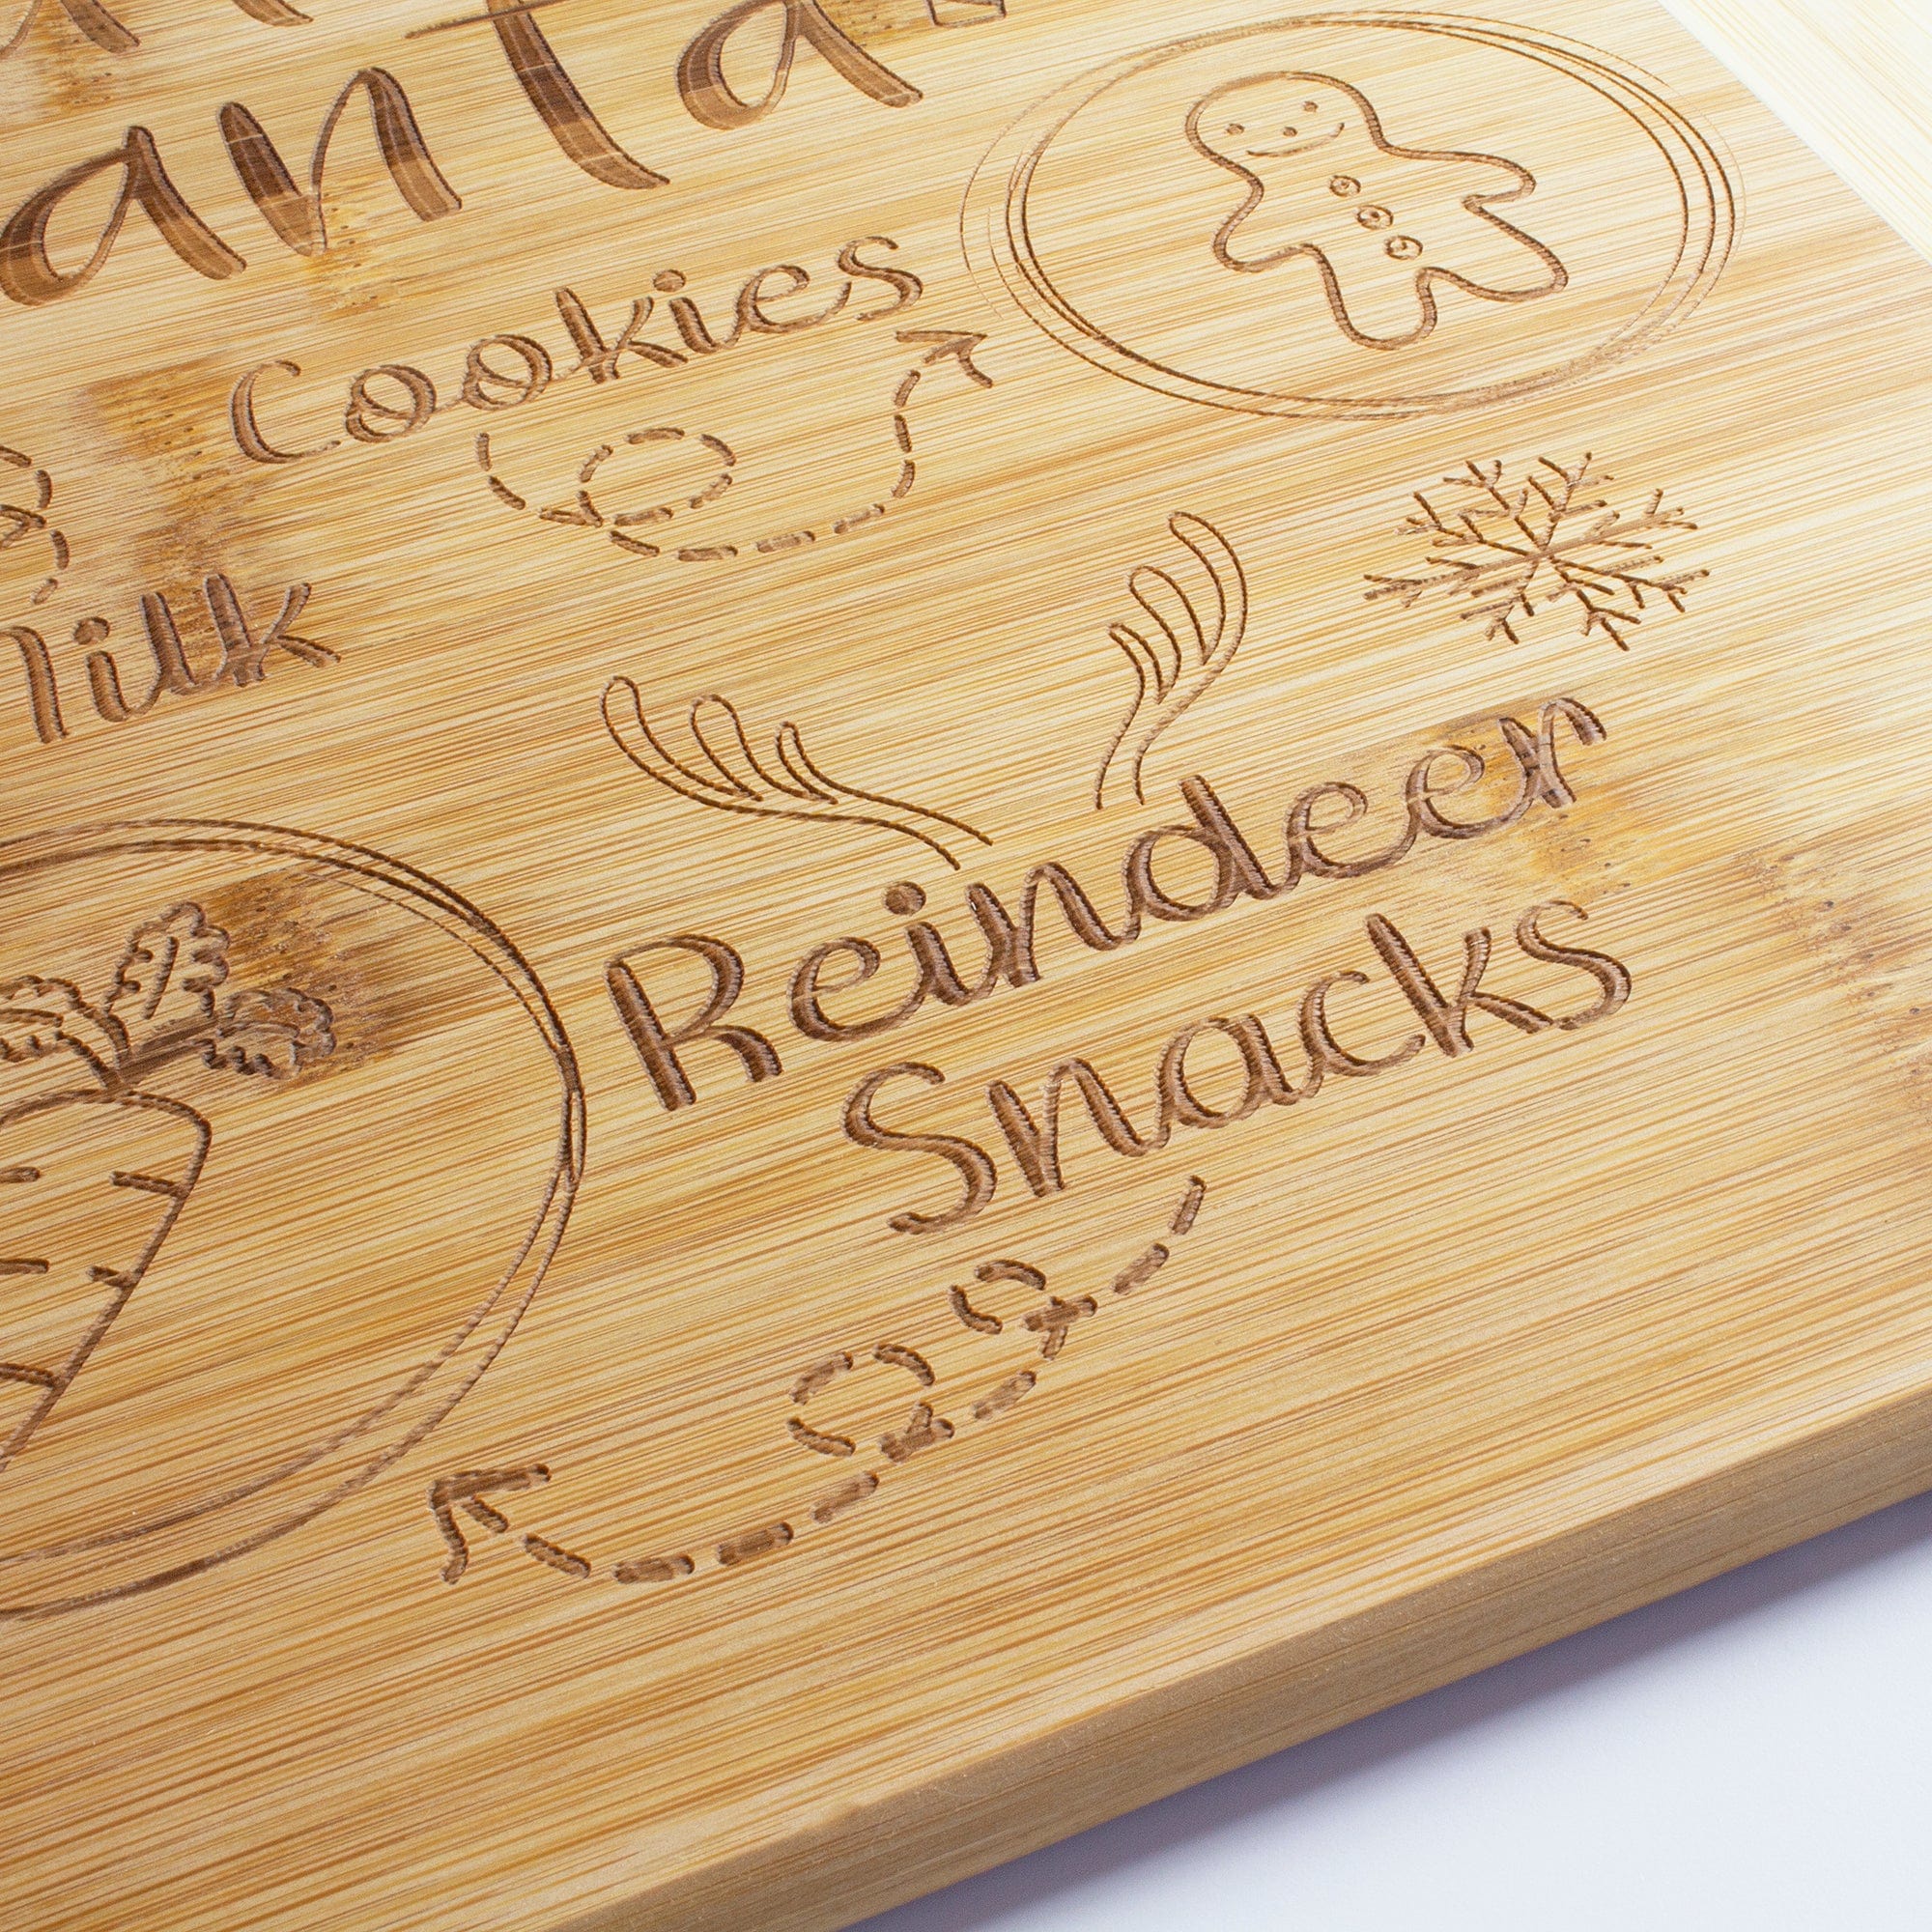 Totally Bamboo “Treats for Santa” Two-Tone Christmas Cutting Board with Engraved Holiday Artwork, 13-1/2" x 11-1/2"